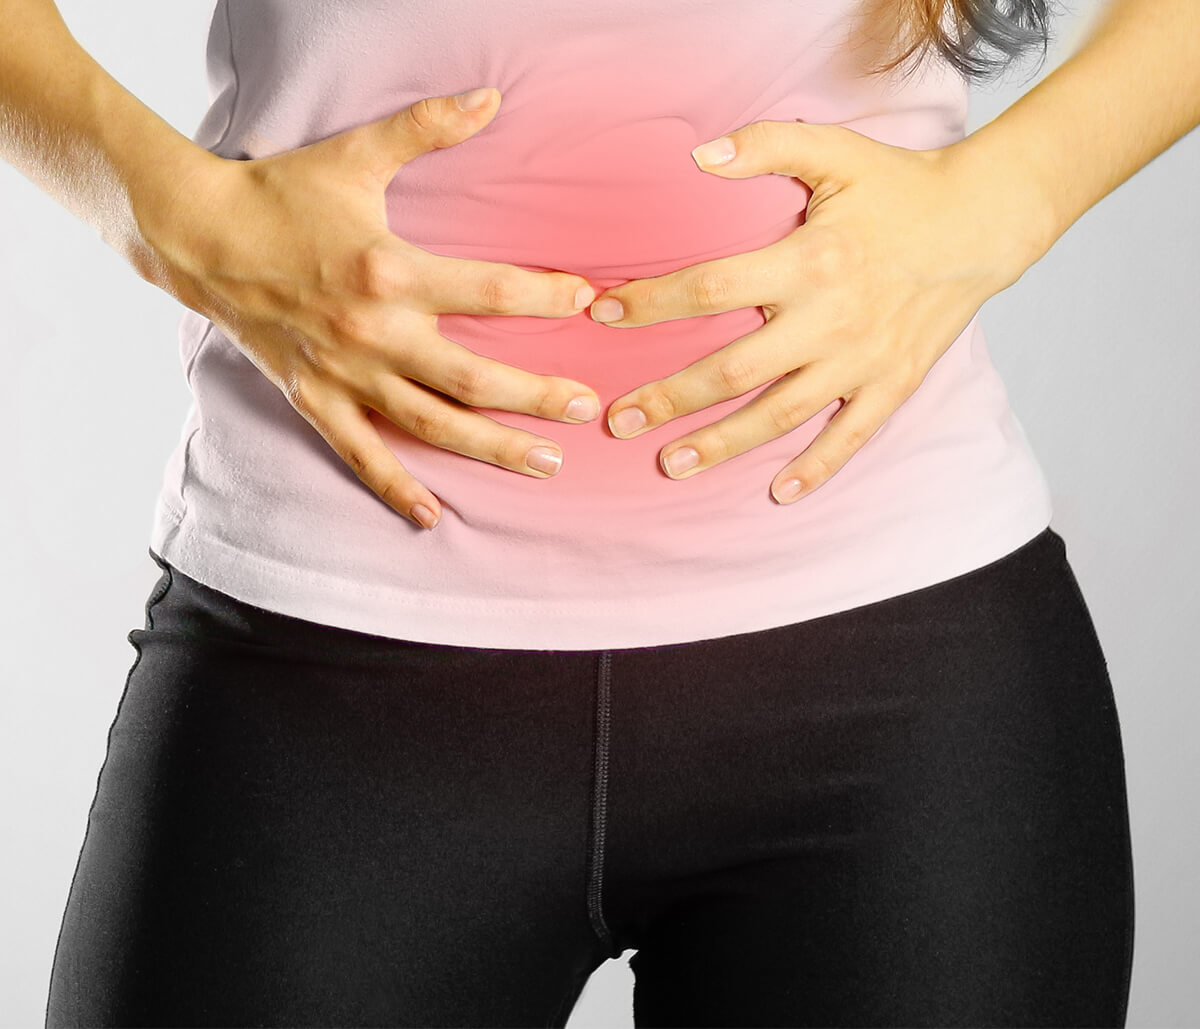 Probiotics and disease, which probiotic is right for me?